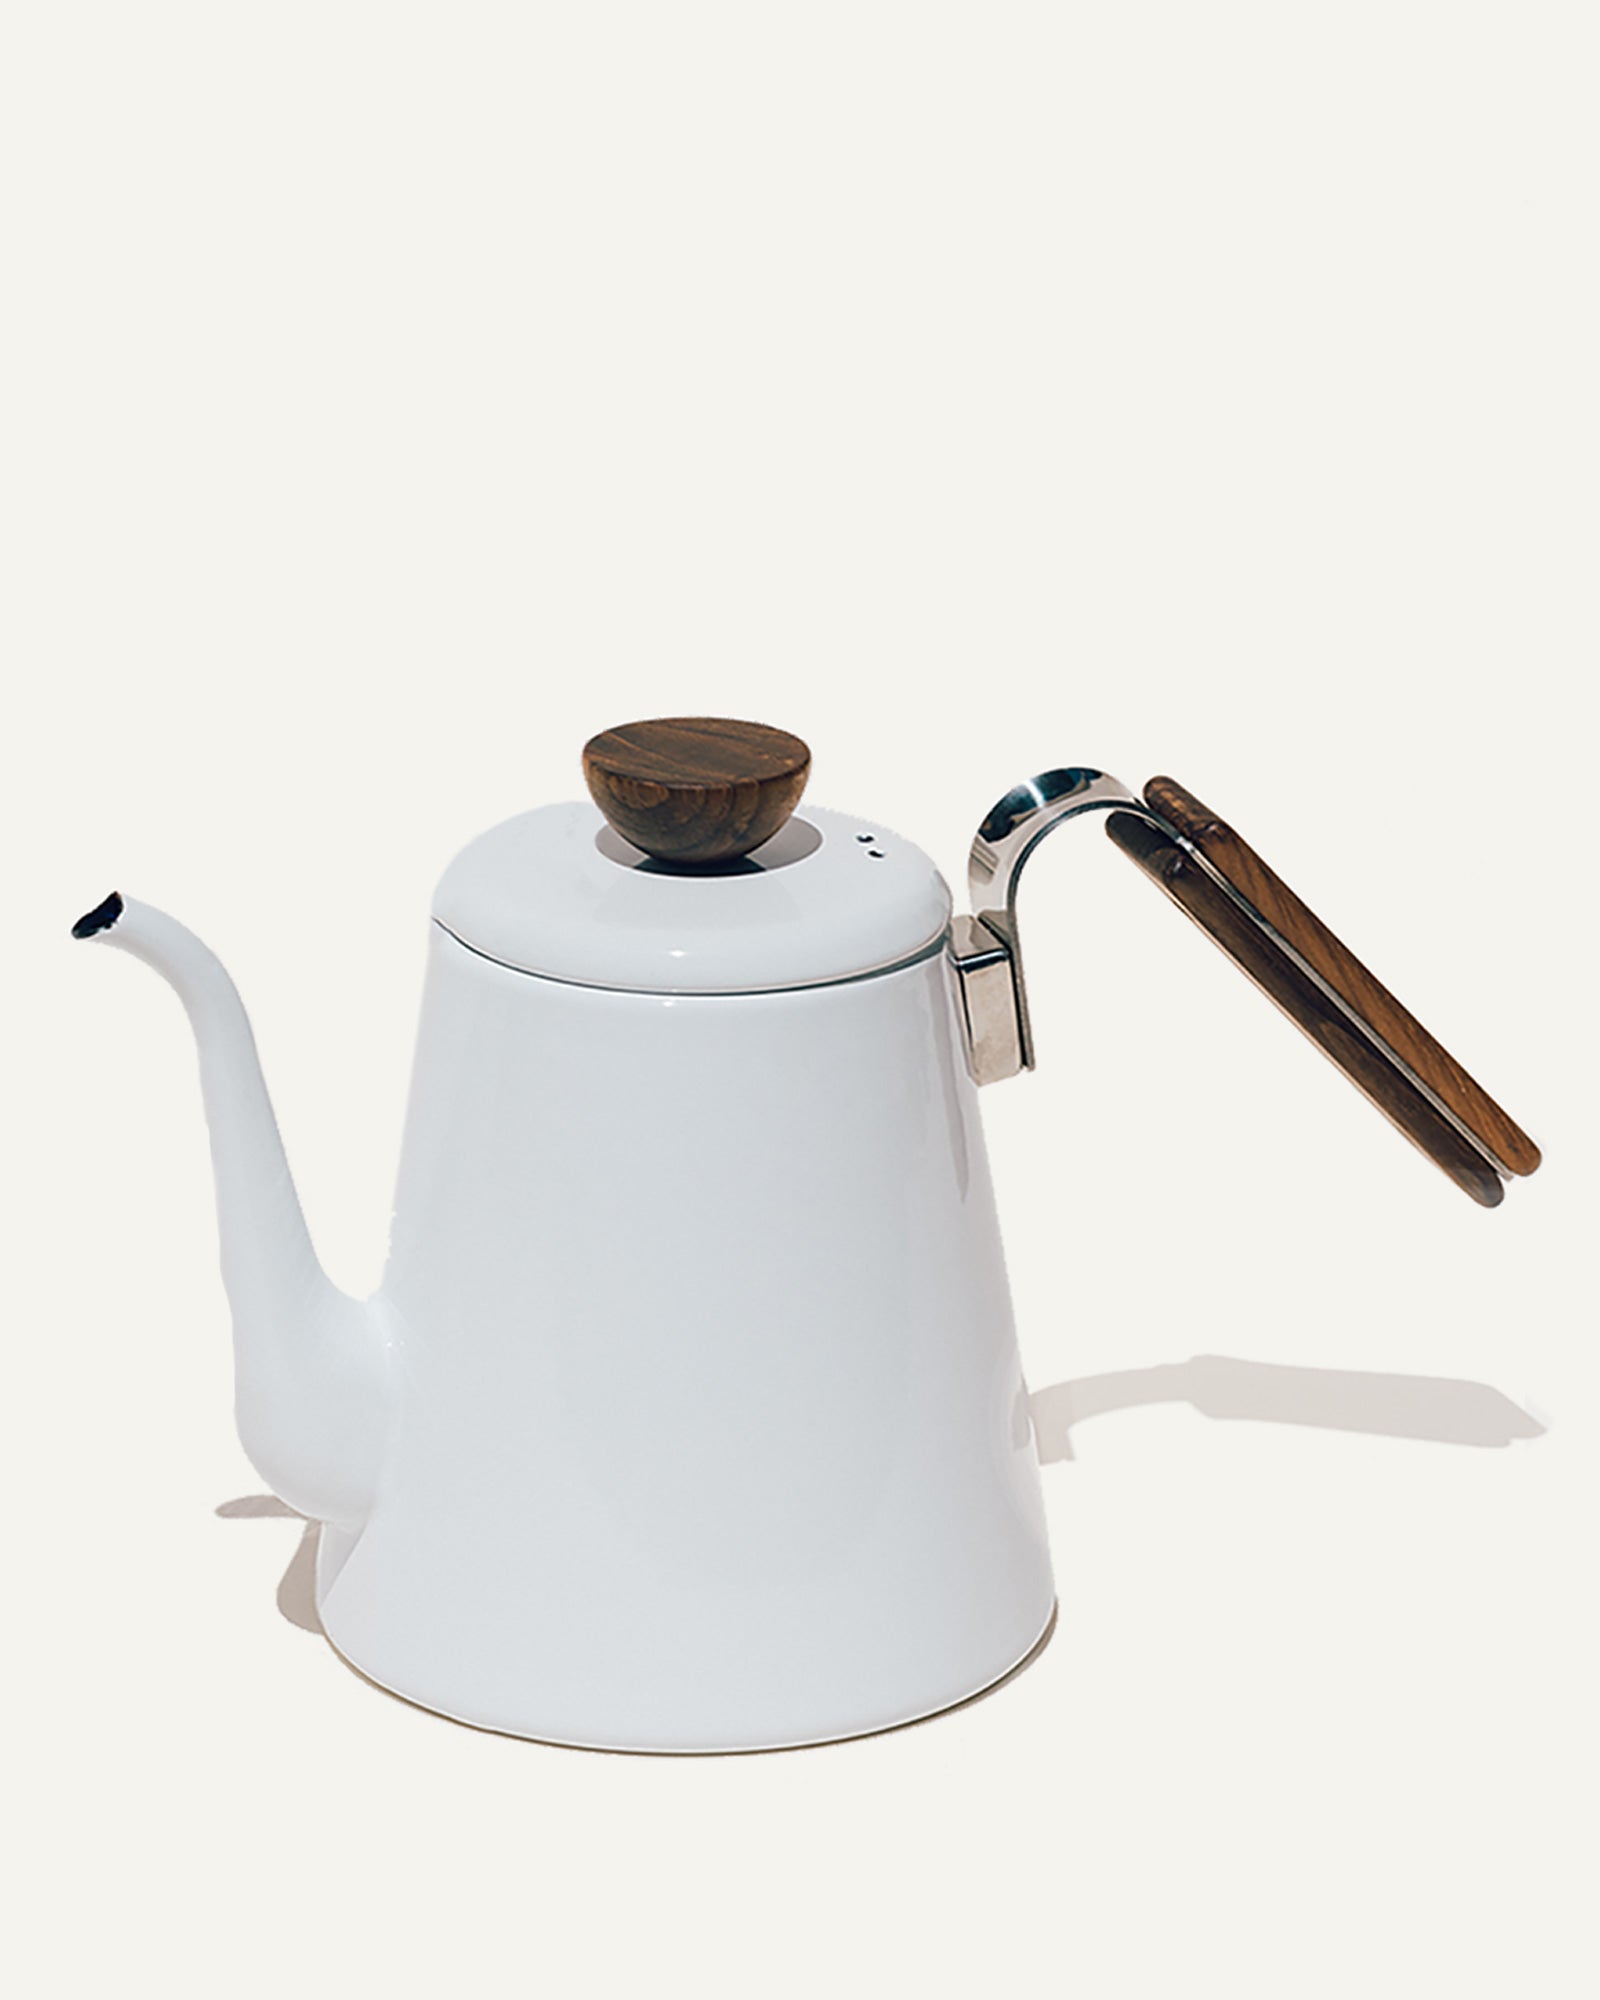 A white enamel kettle by Bona with a wooden handle